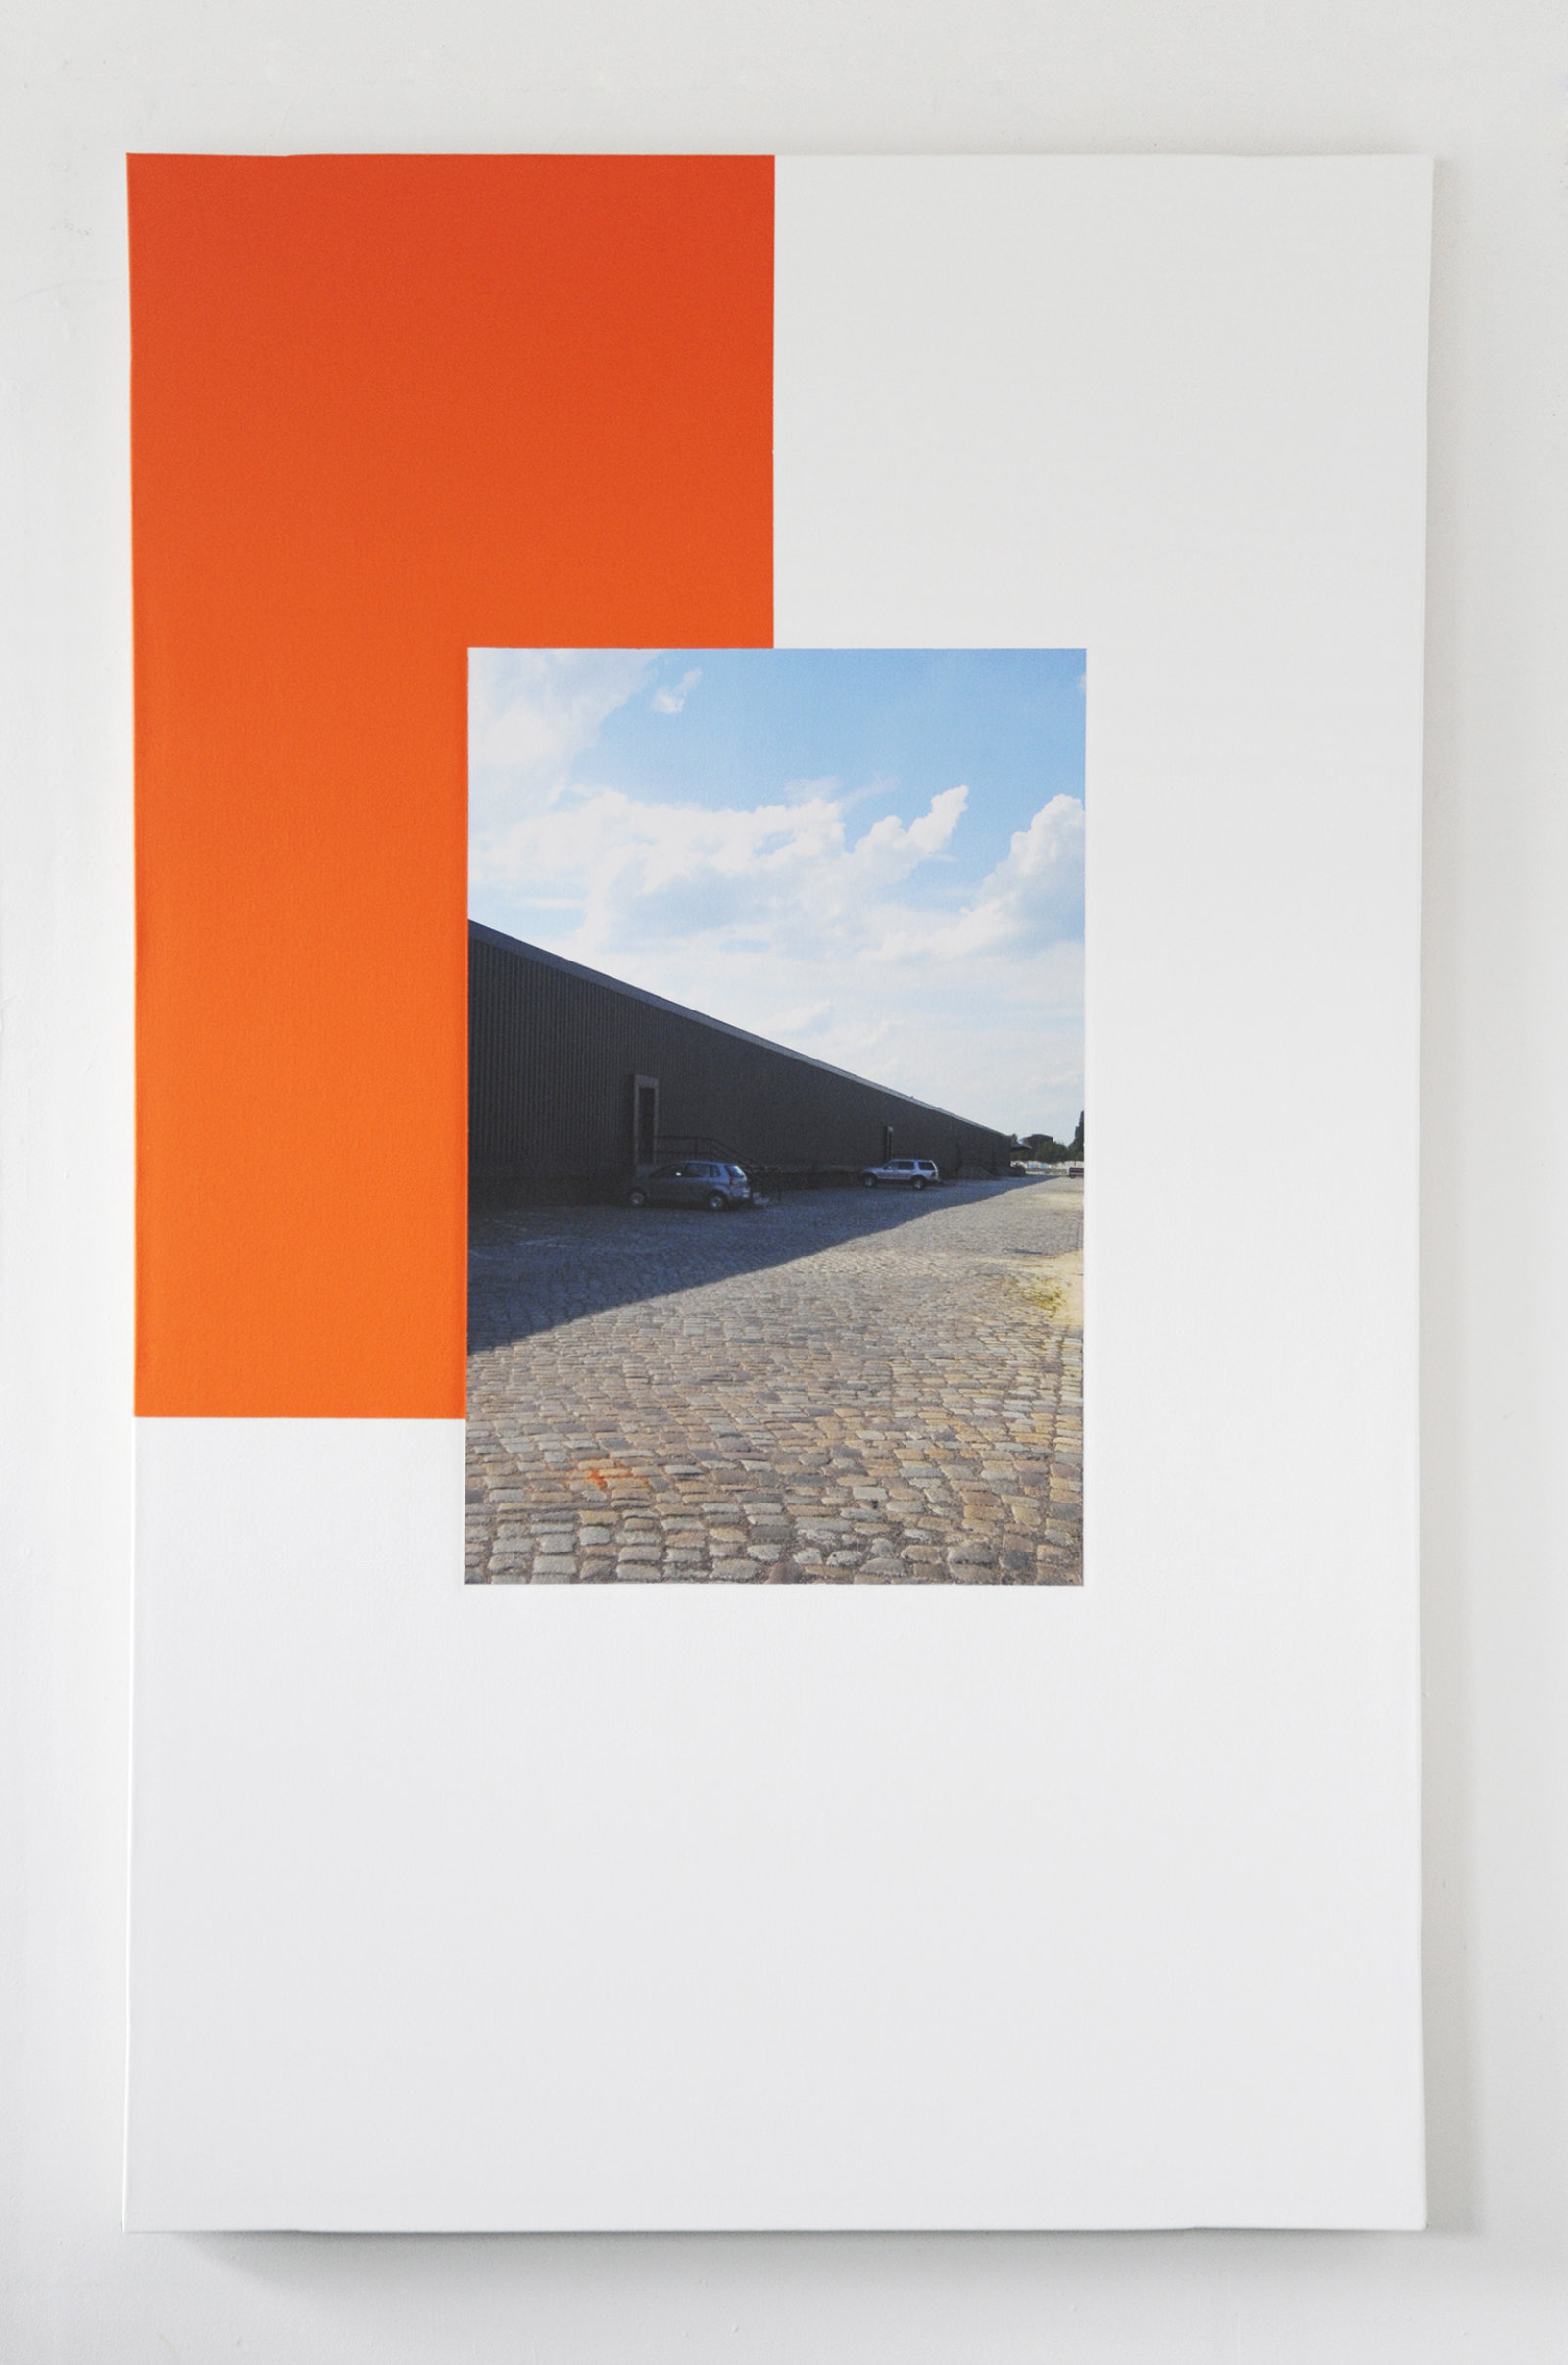 Ian Wallace, Berlin Perspective, 2009, photolaminate and acrylic on canvas, 78 x 48 in. (198 x 122 cm)